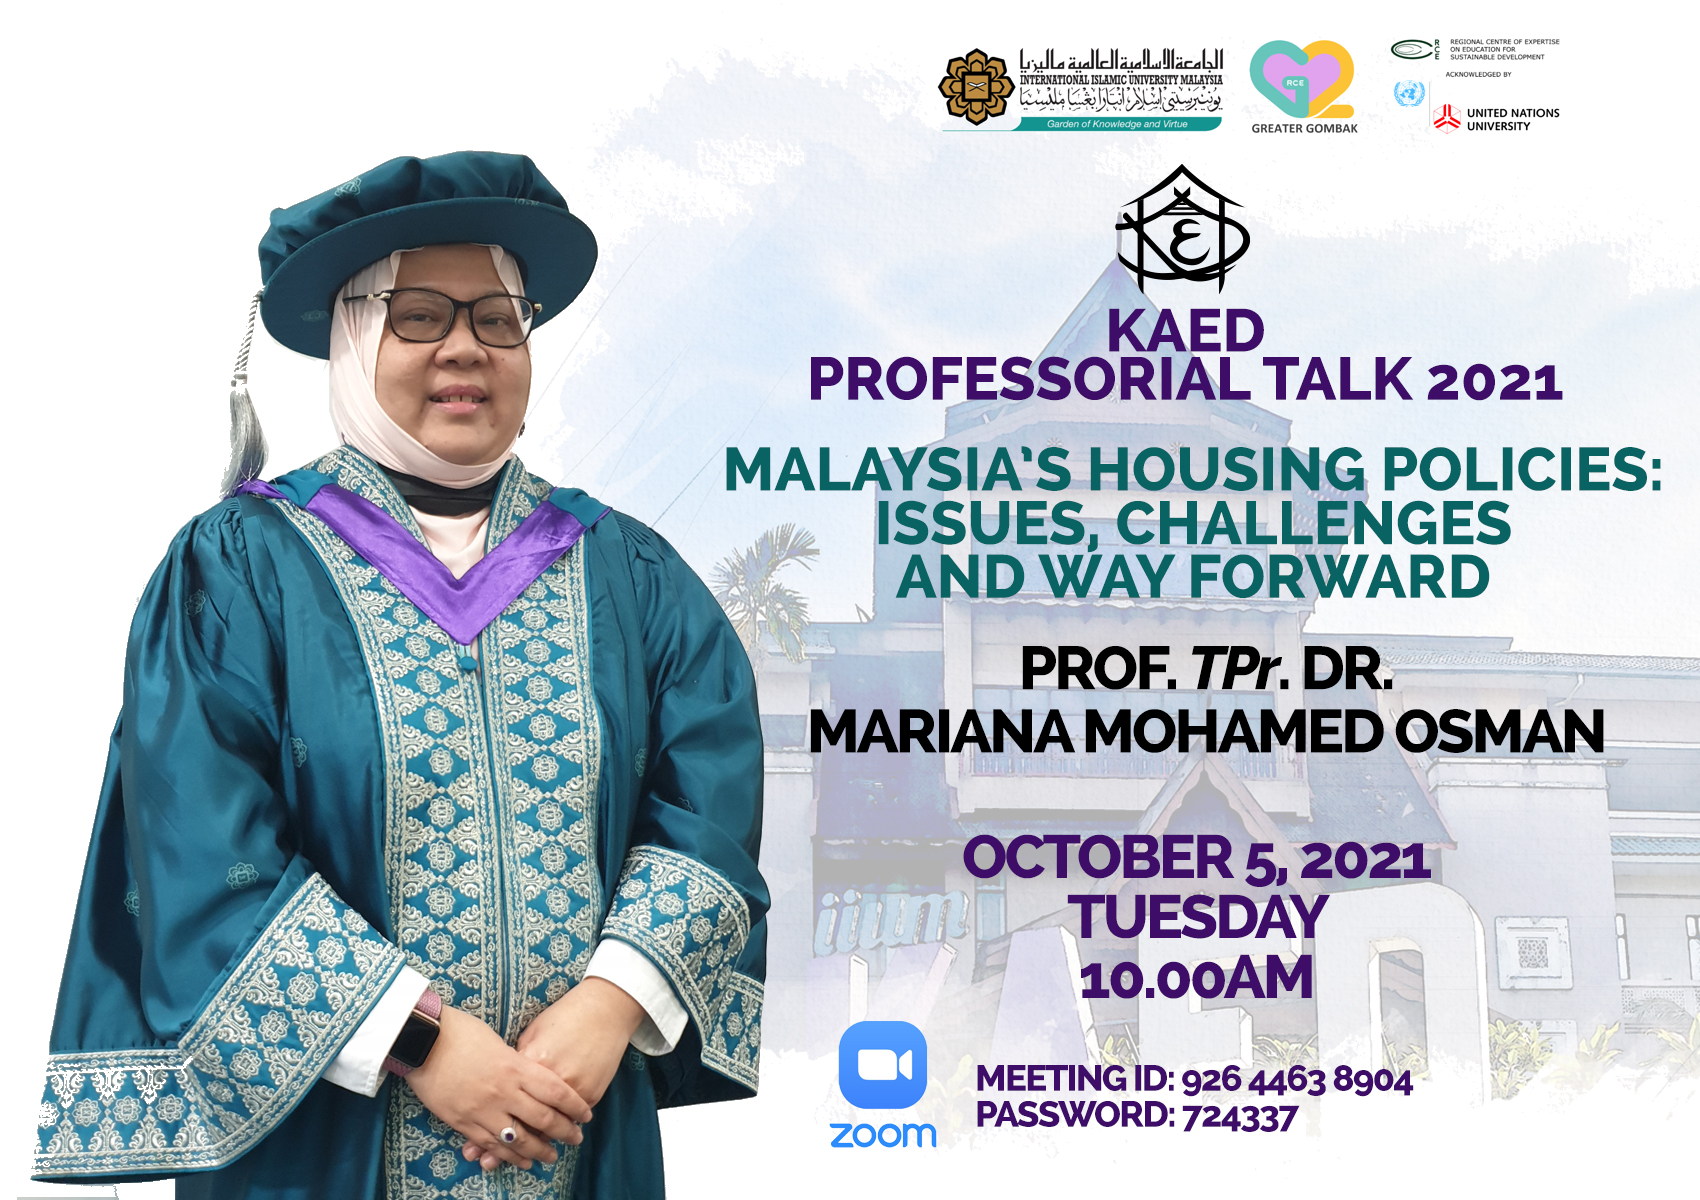 KAED Professorial Talk 2021: Malaysia's Housing Policies: Issues, Challenges and Way Forward by Prof. TPr.  Dr. Mariana Mohamed Osman